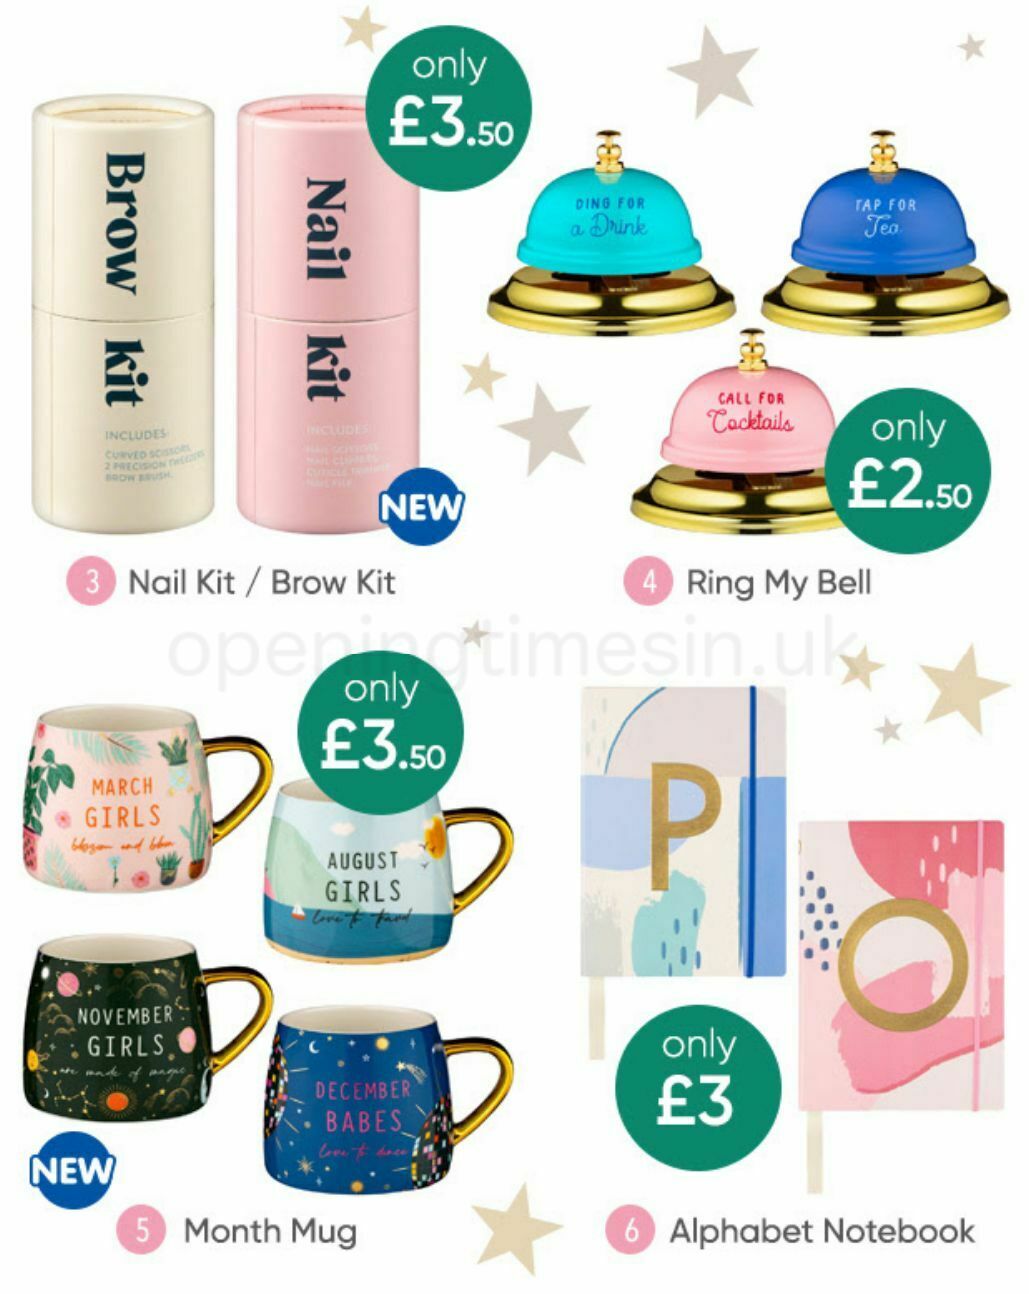 B&M Offers from 22 November